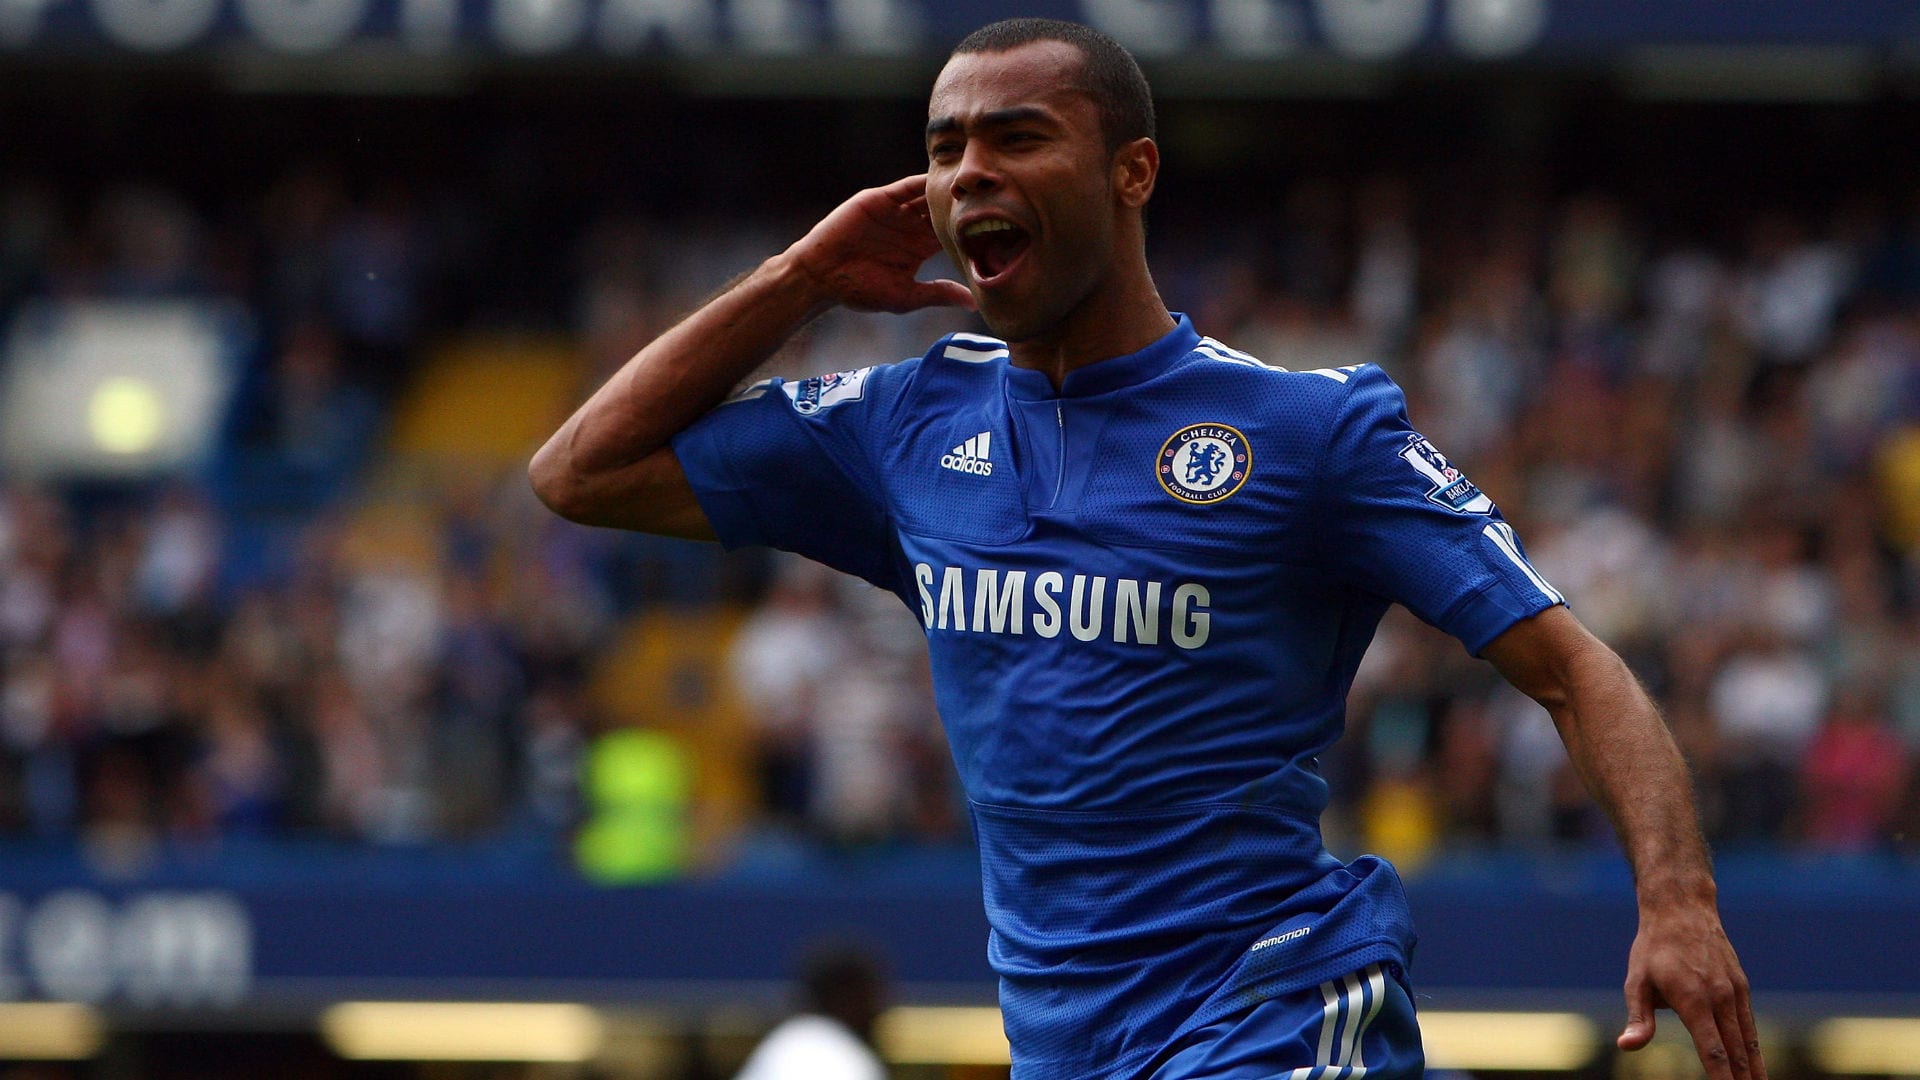 Ashley Cole Net Worth: Career & Earnings As a Professional Soccer Player